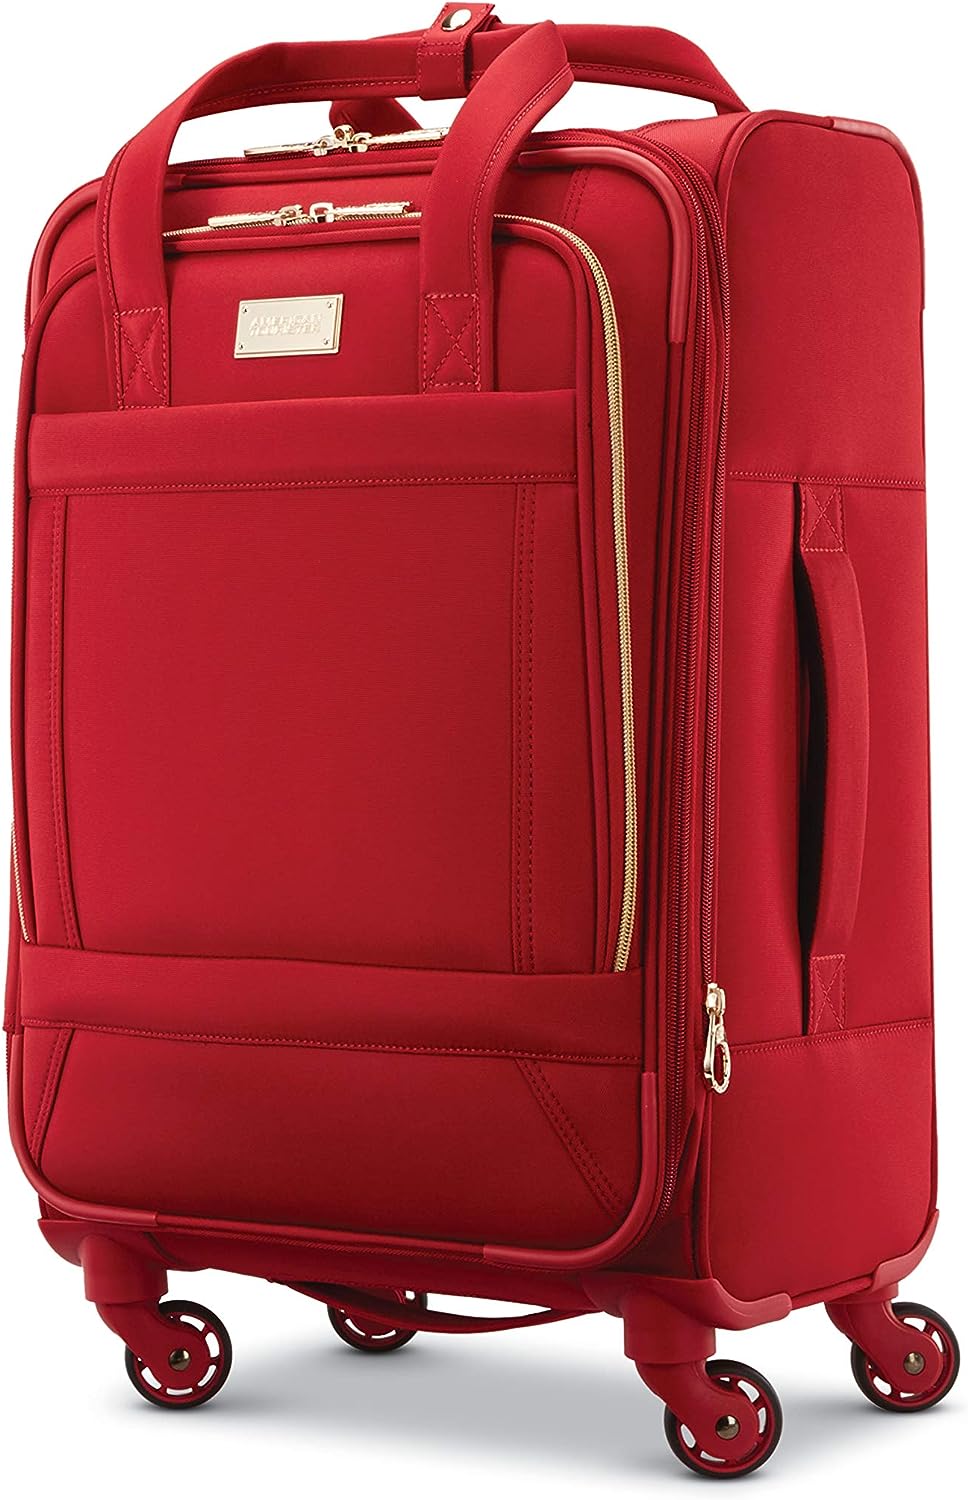 11. The American Tourister Belle Voyage Carry-on Spinner Luggage for Seniors 